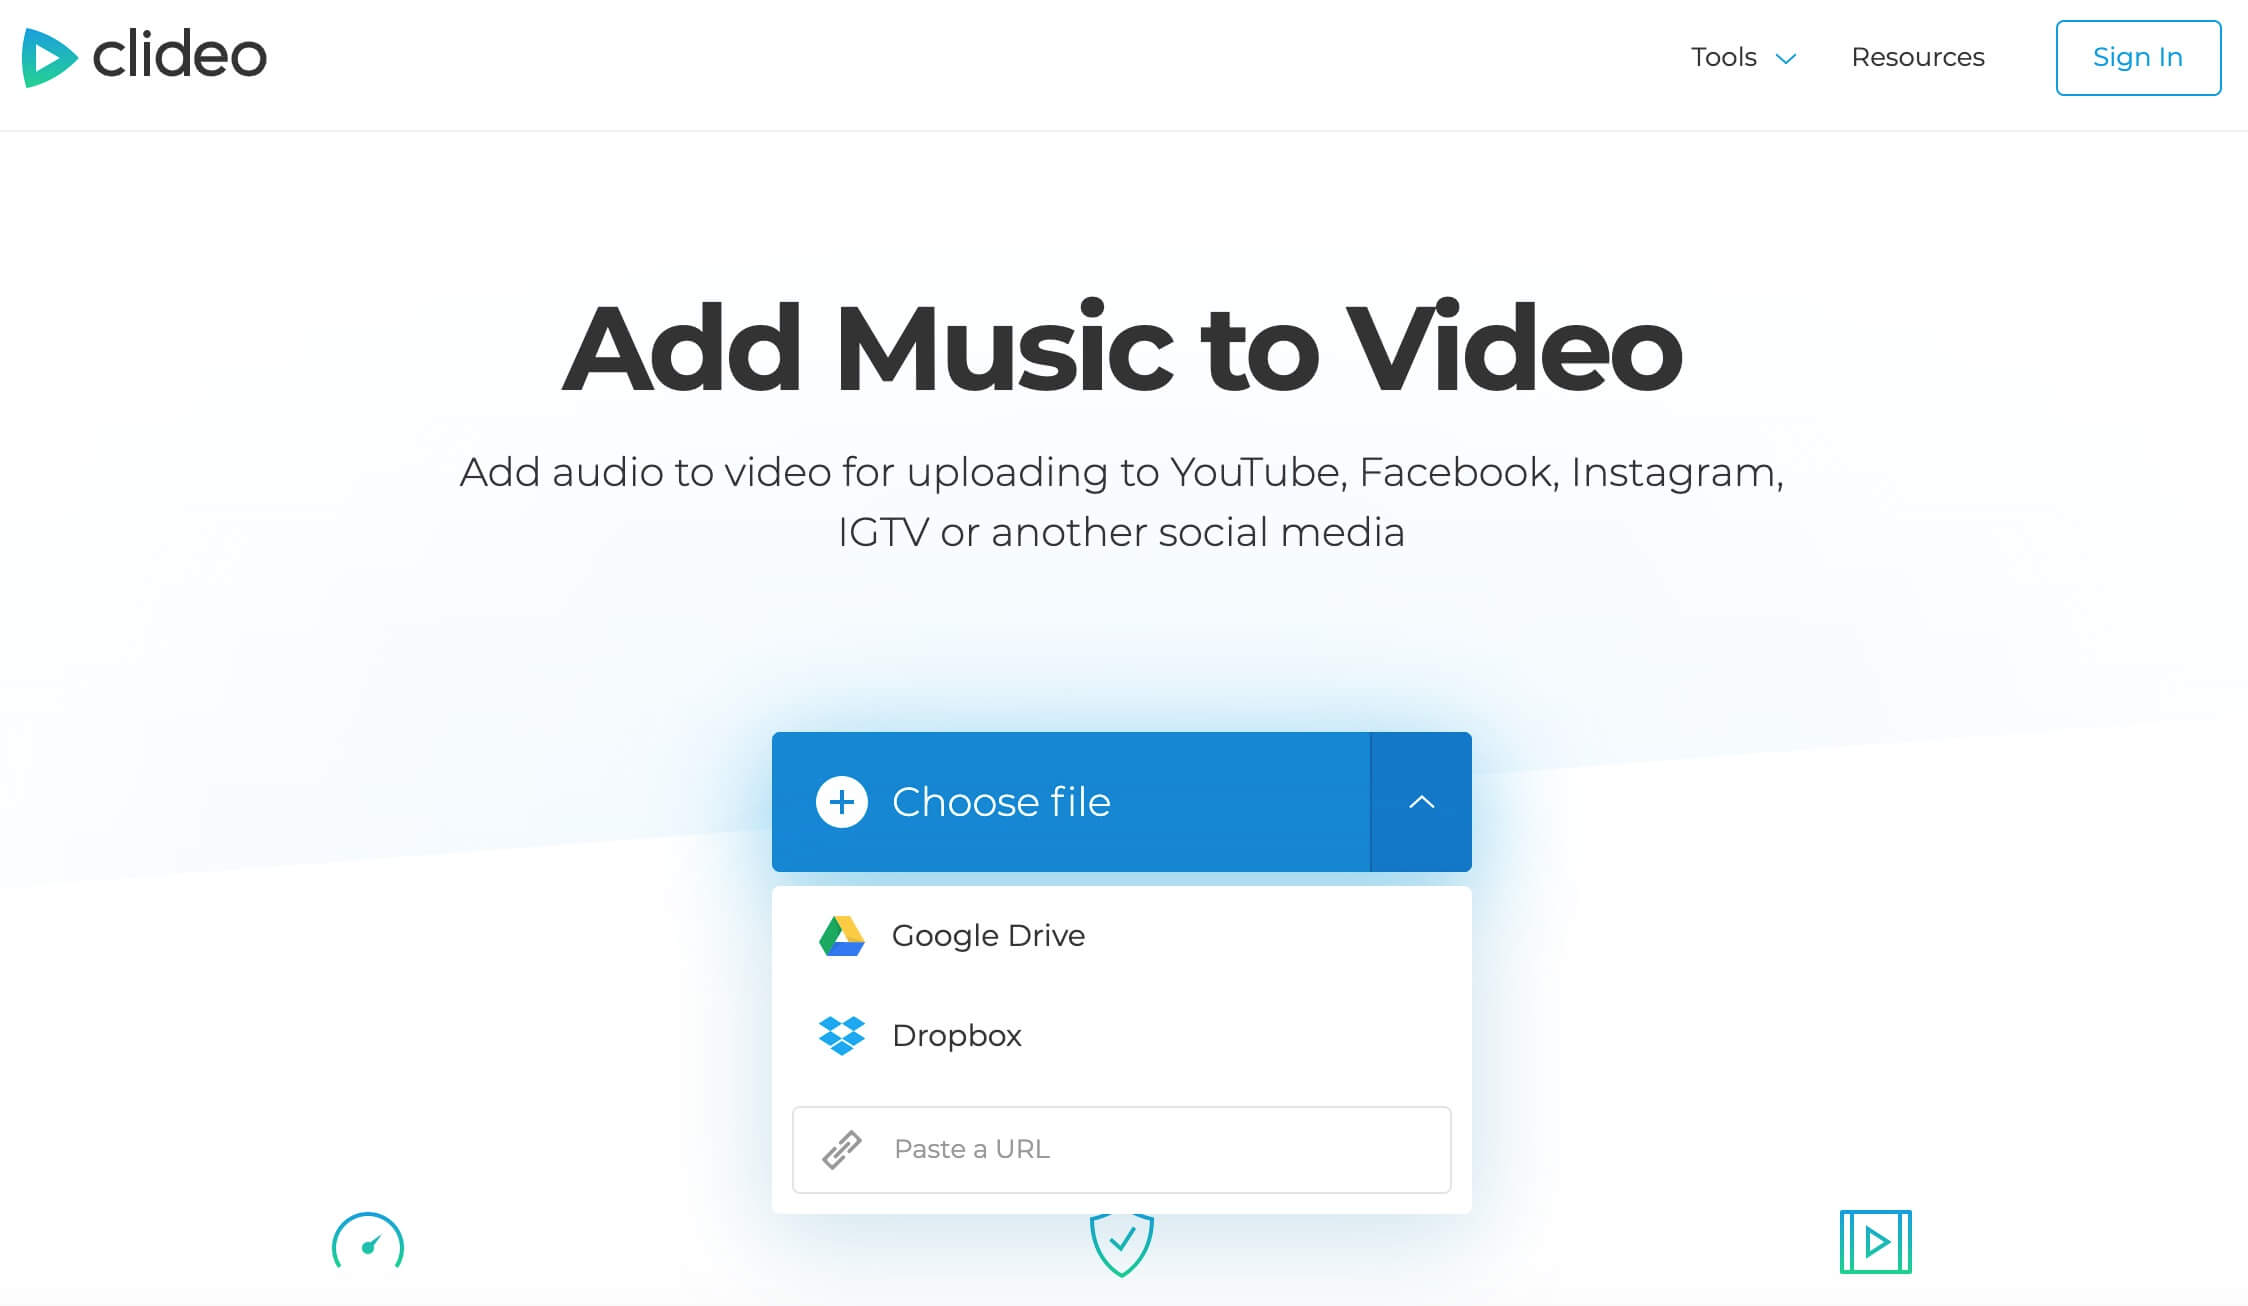 add-music-to-video-in-clideo